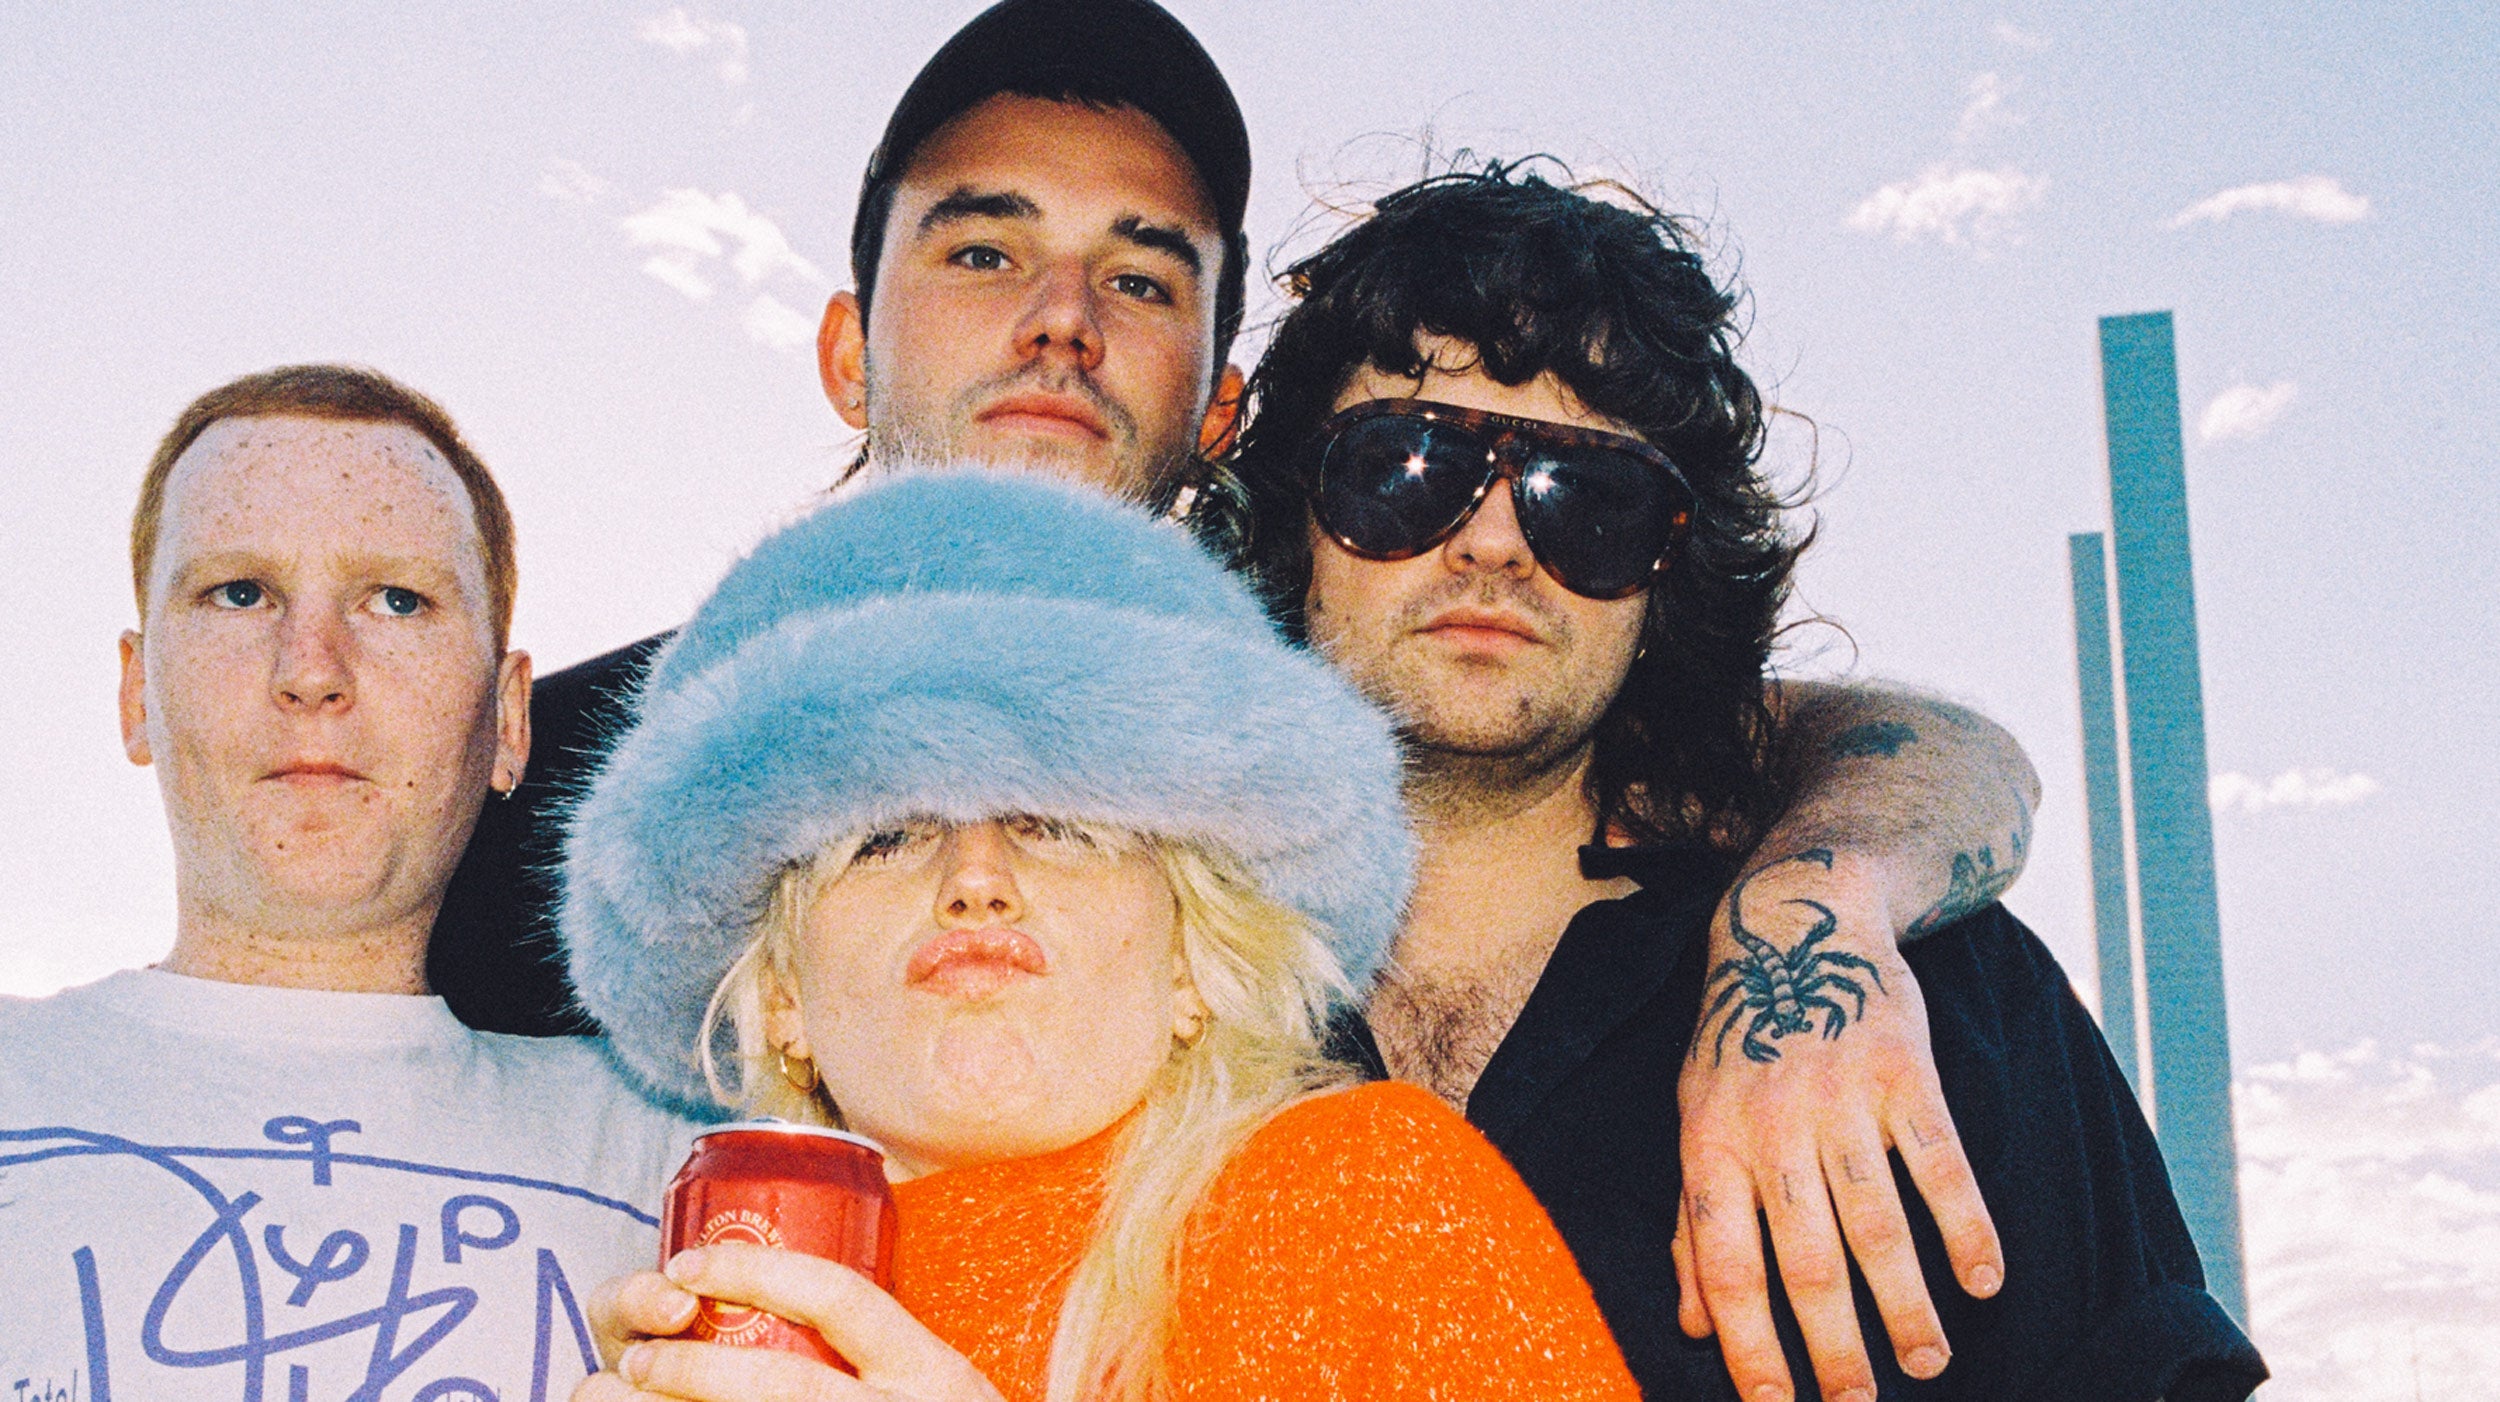 Amyl and the Sniffers pre-sale code